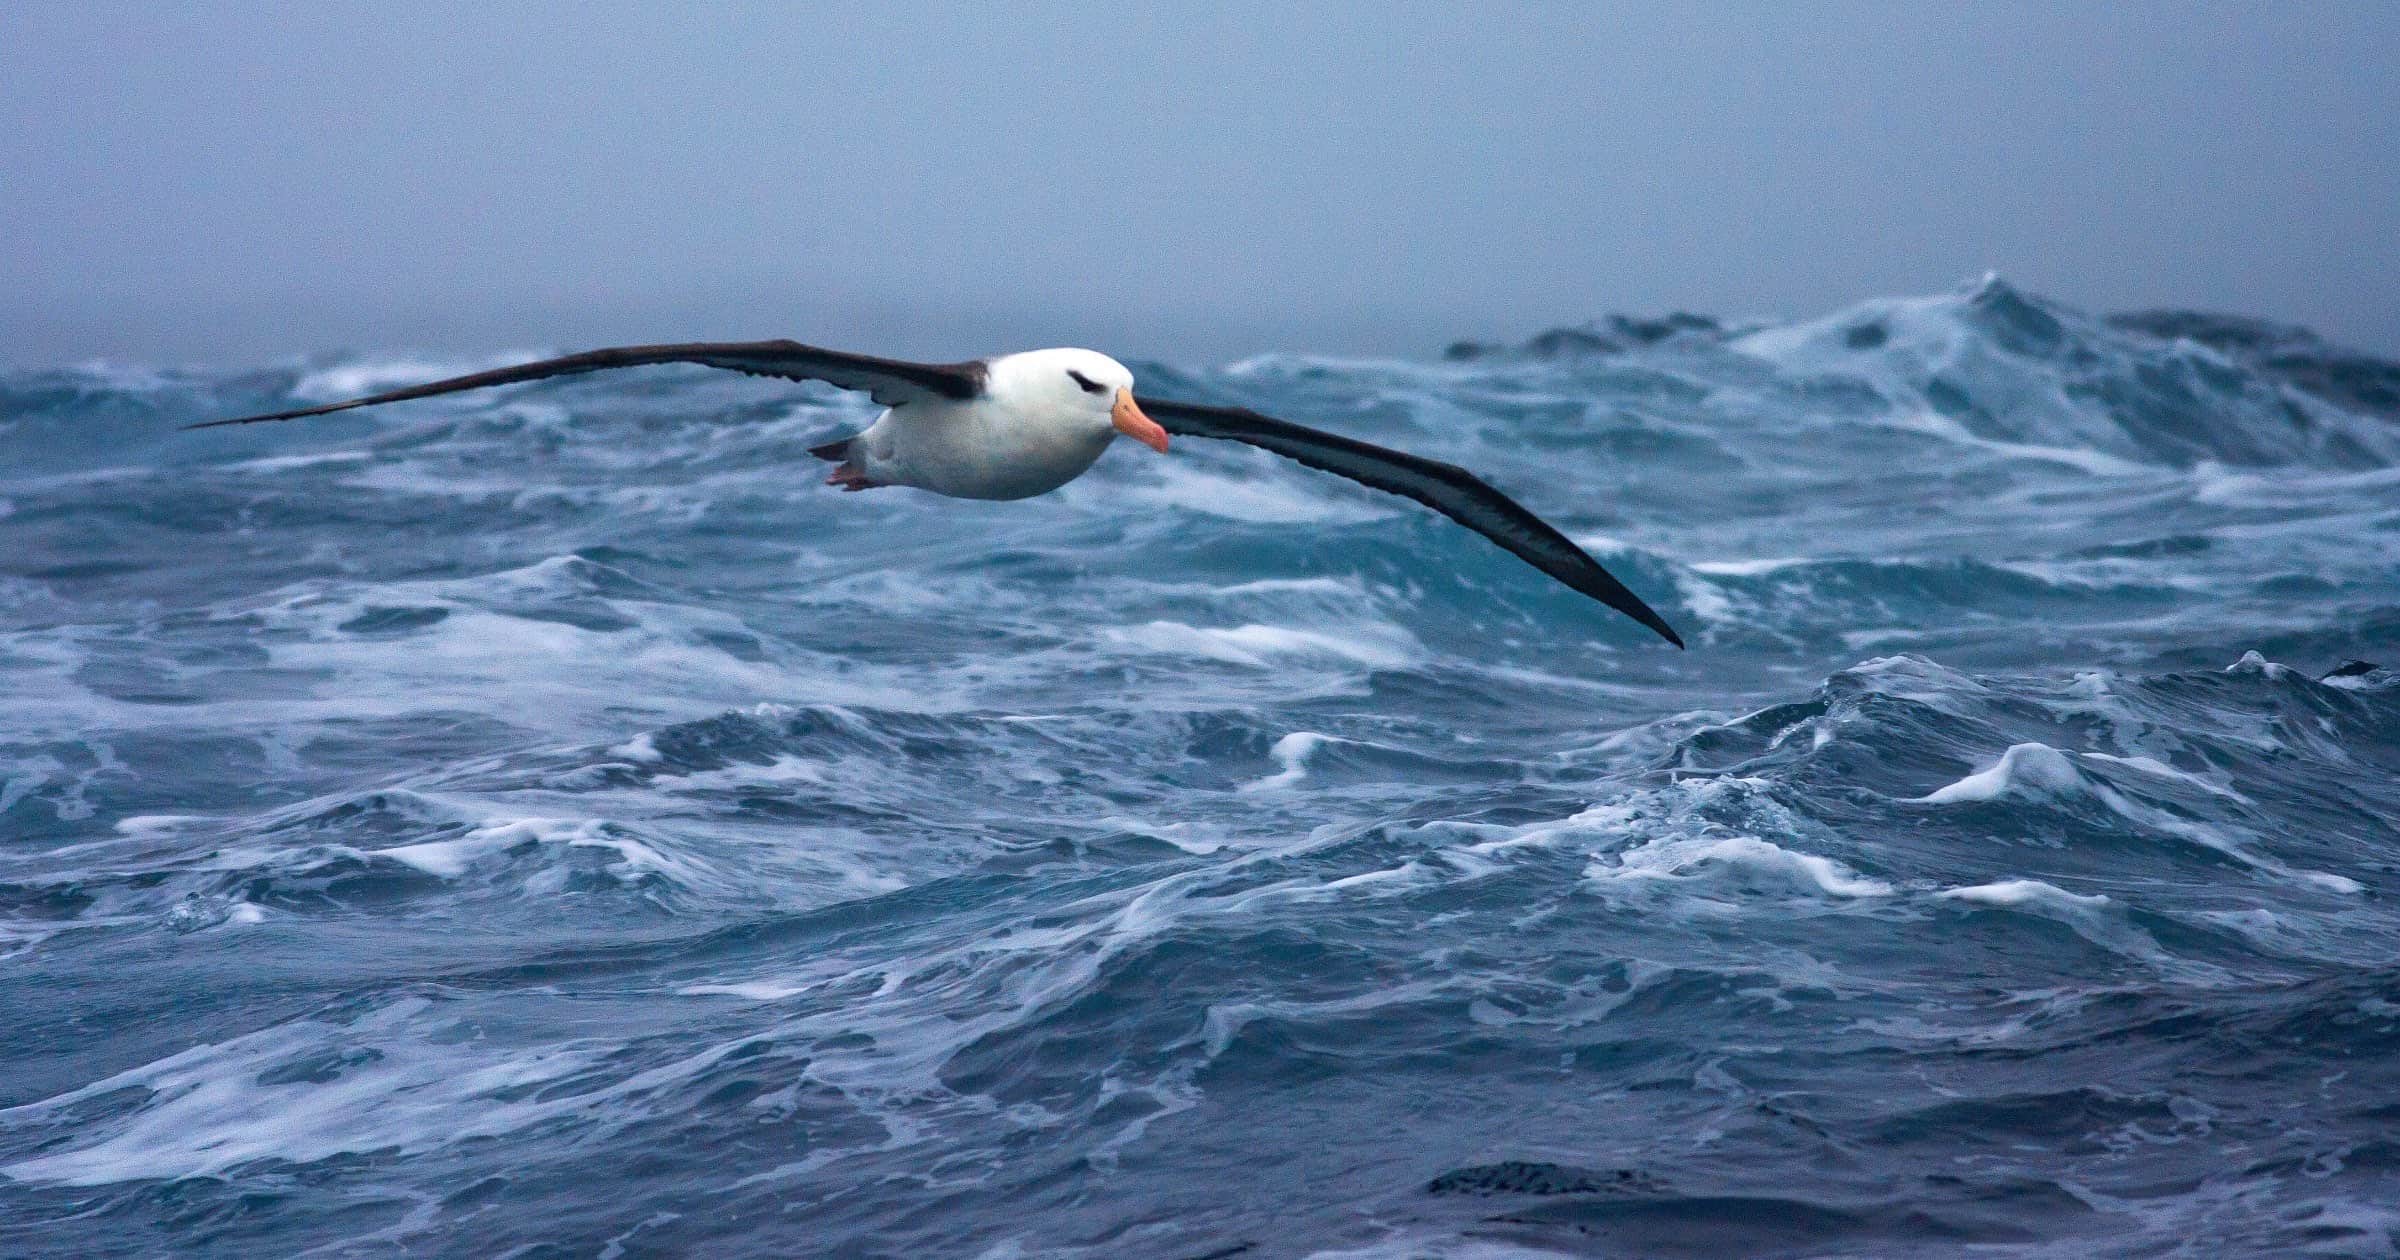 Scientists use Cyberpunk Albatrosses to Scan for Infrasound at Sea